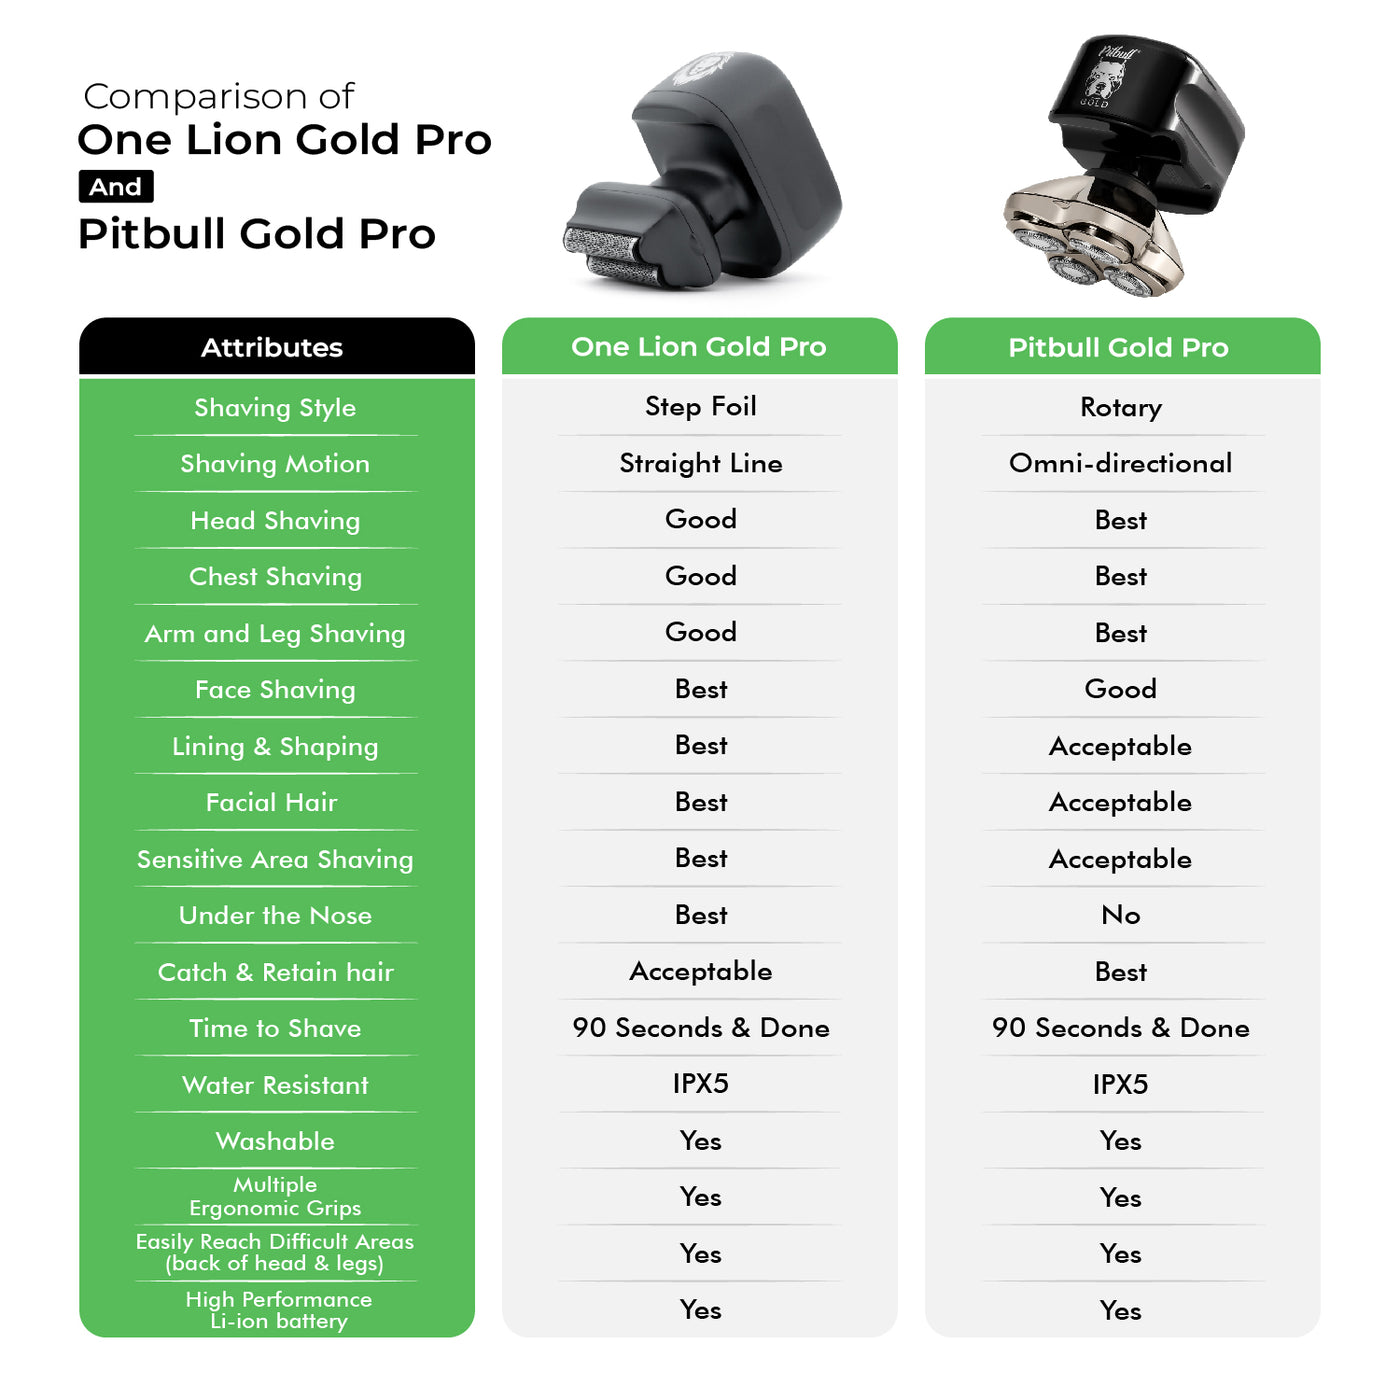 Discover the differences between the One Lion Gold Pro and the Pitbull Gold Pro with our comprehensive comparison chart. Make an informed choice that aligns with your grooming preferences and needs.